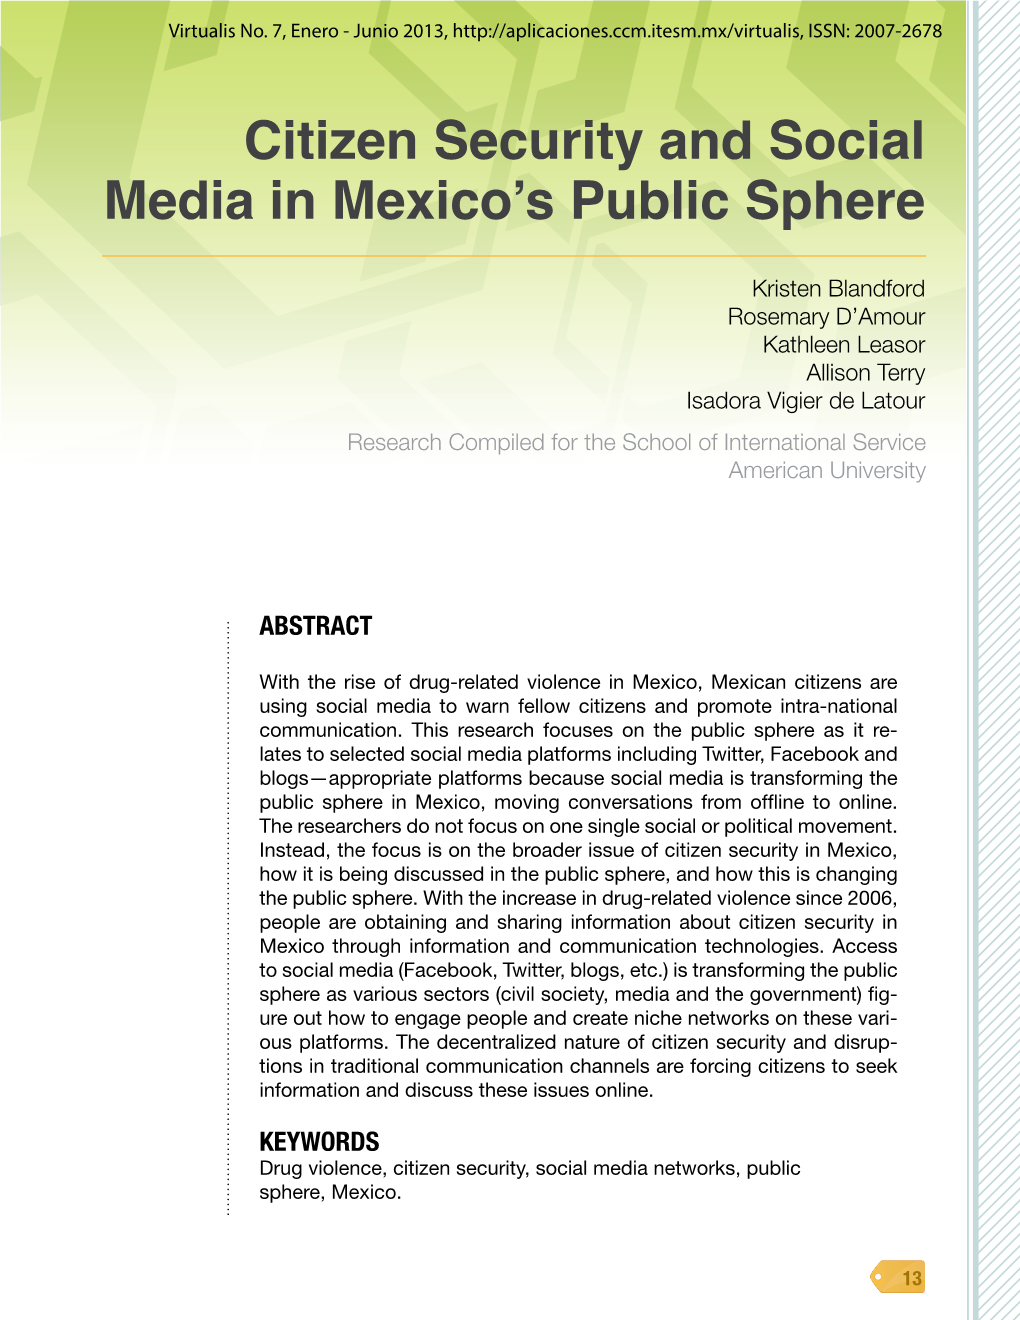 Citizen Security and Social Media in Mexico's Public Sphere